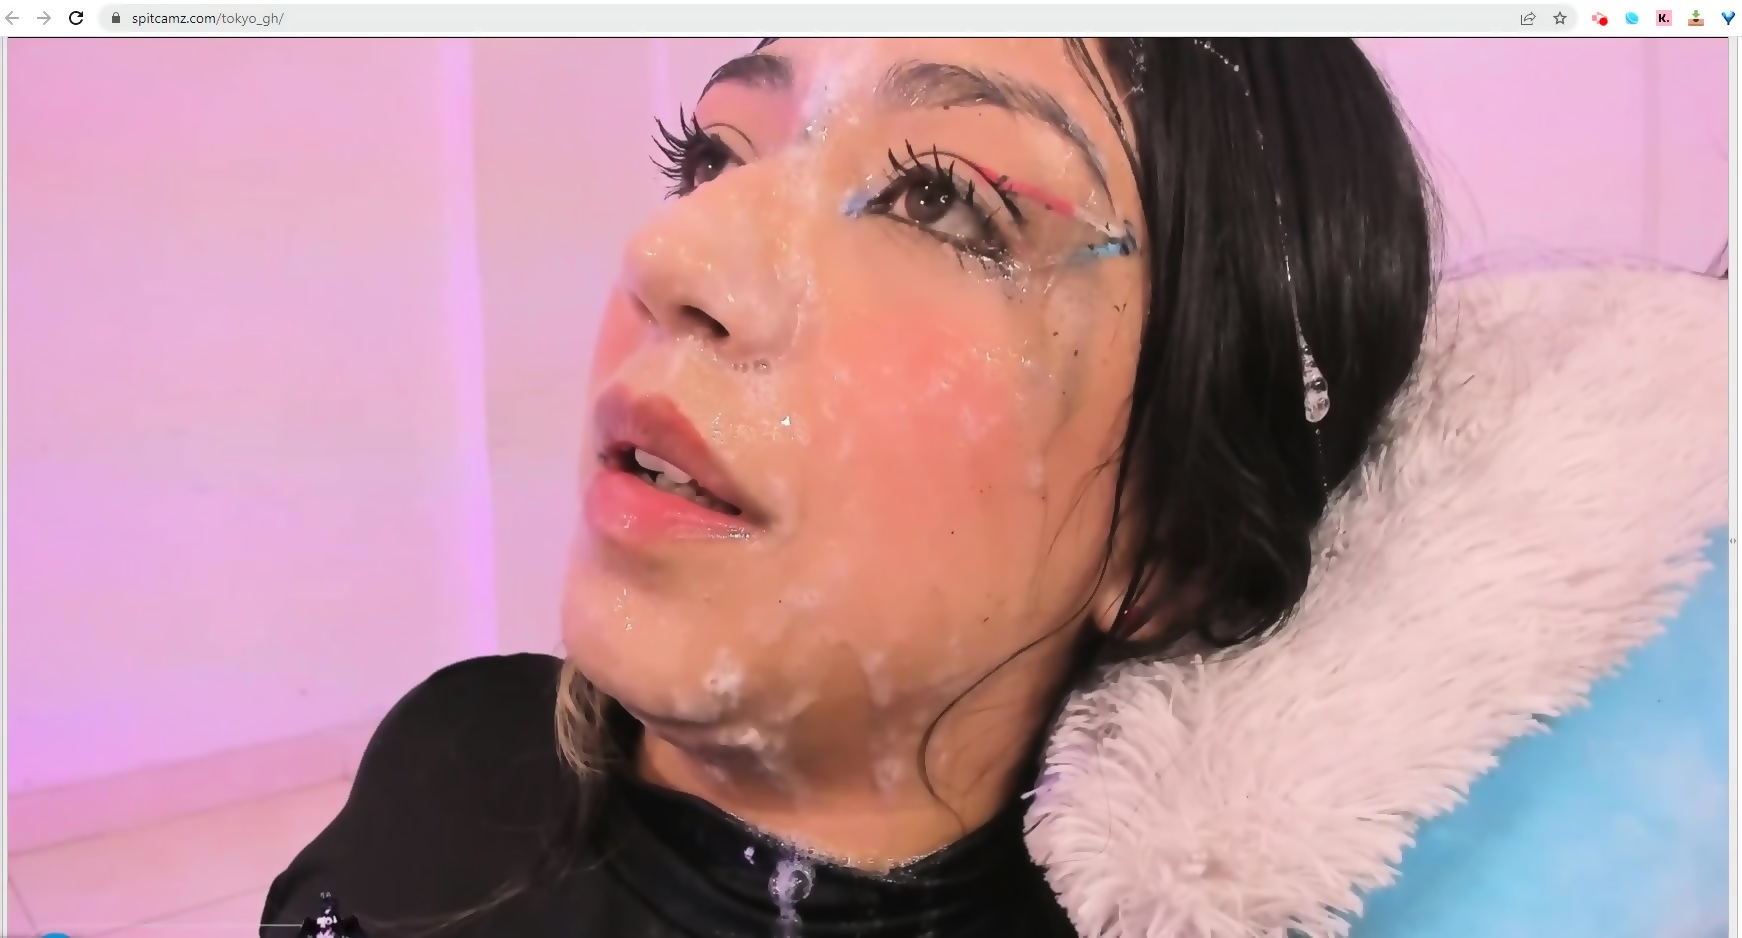 Latina Coverd In Globs Of Her Own Spit - EPORNER